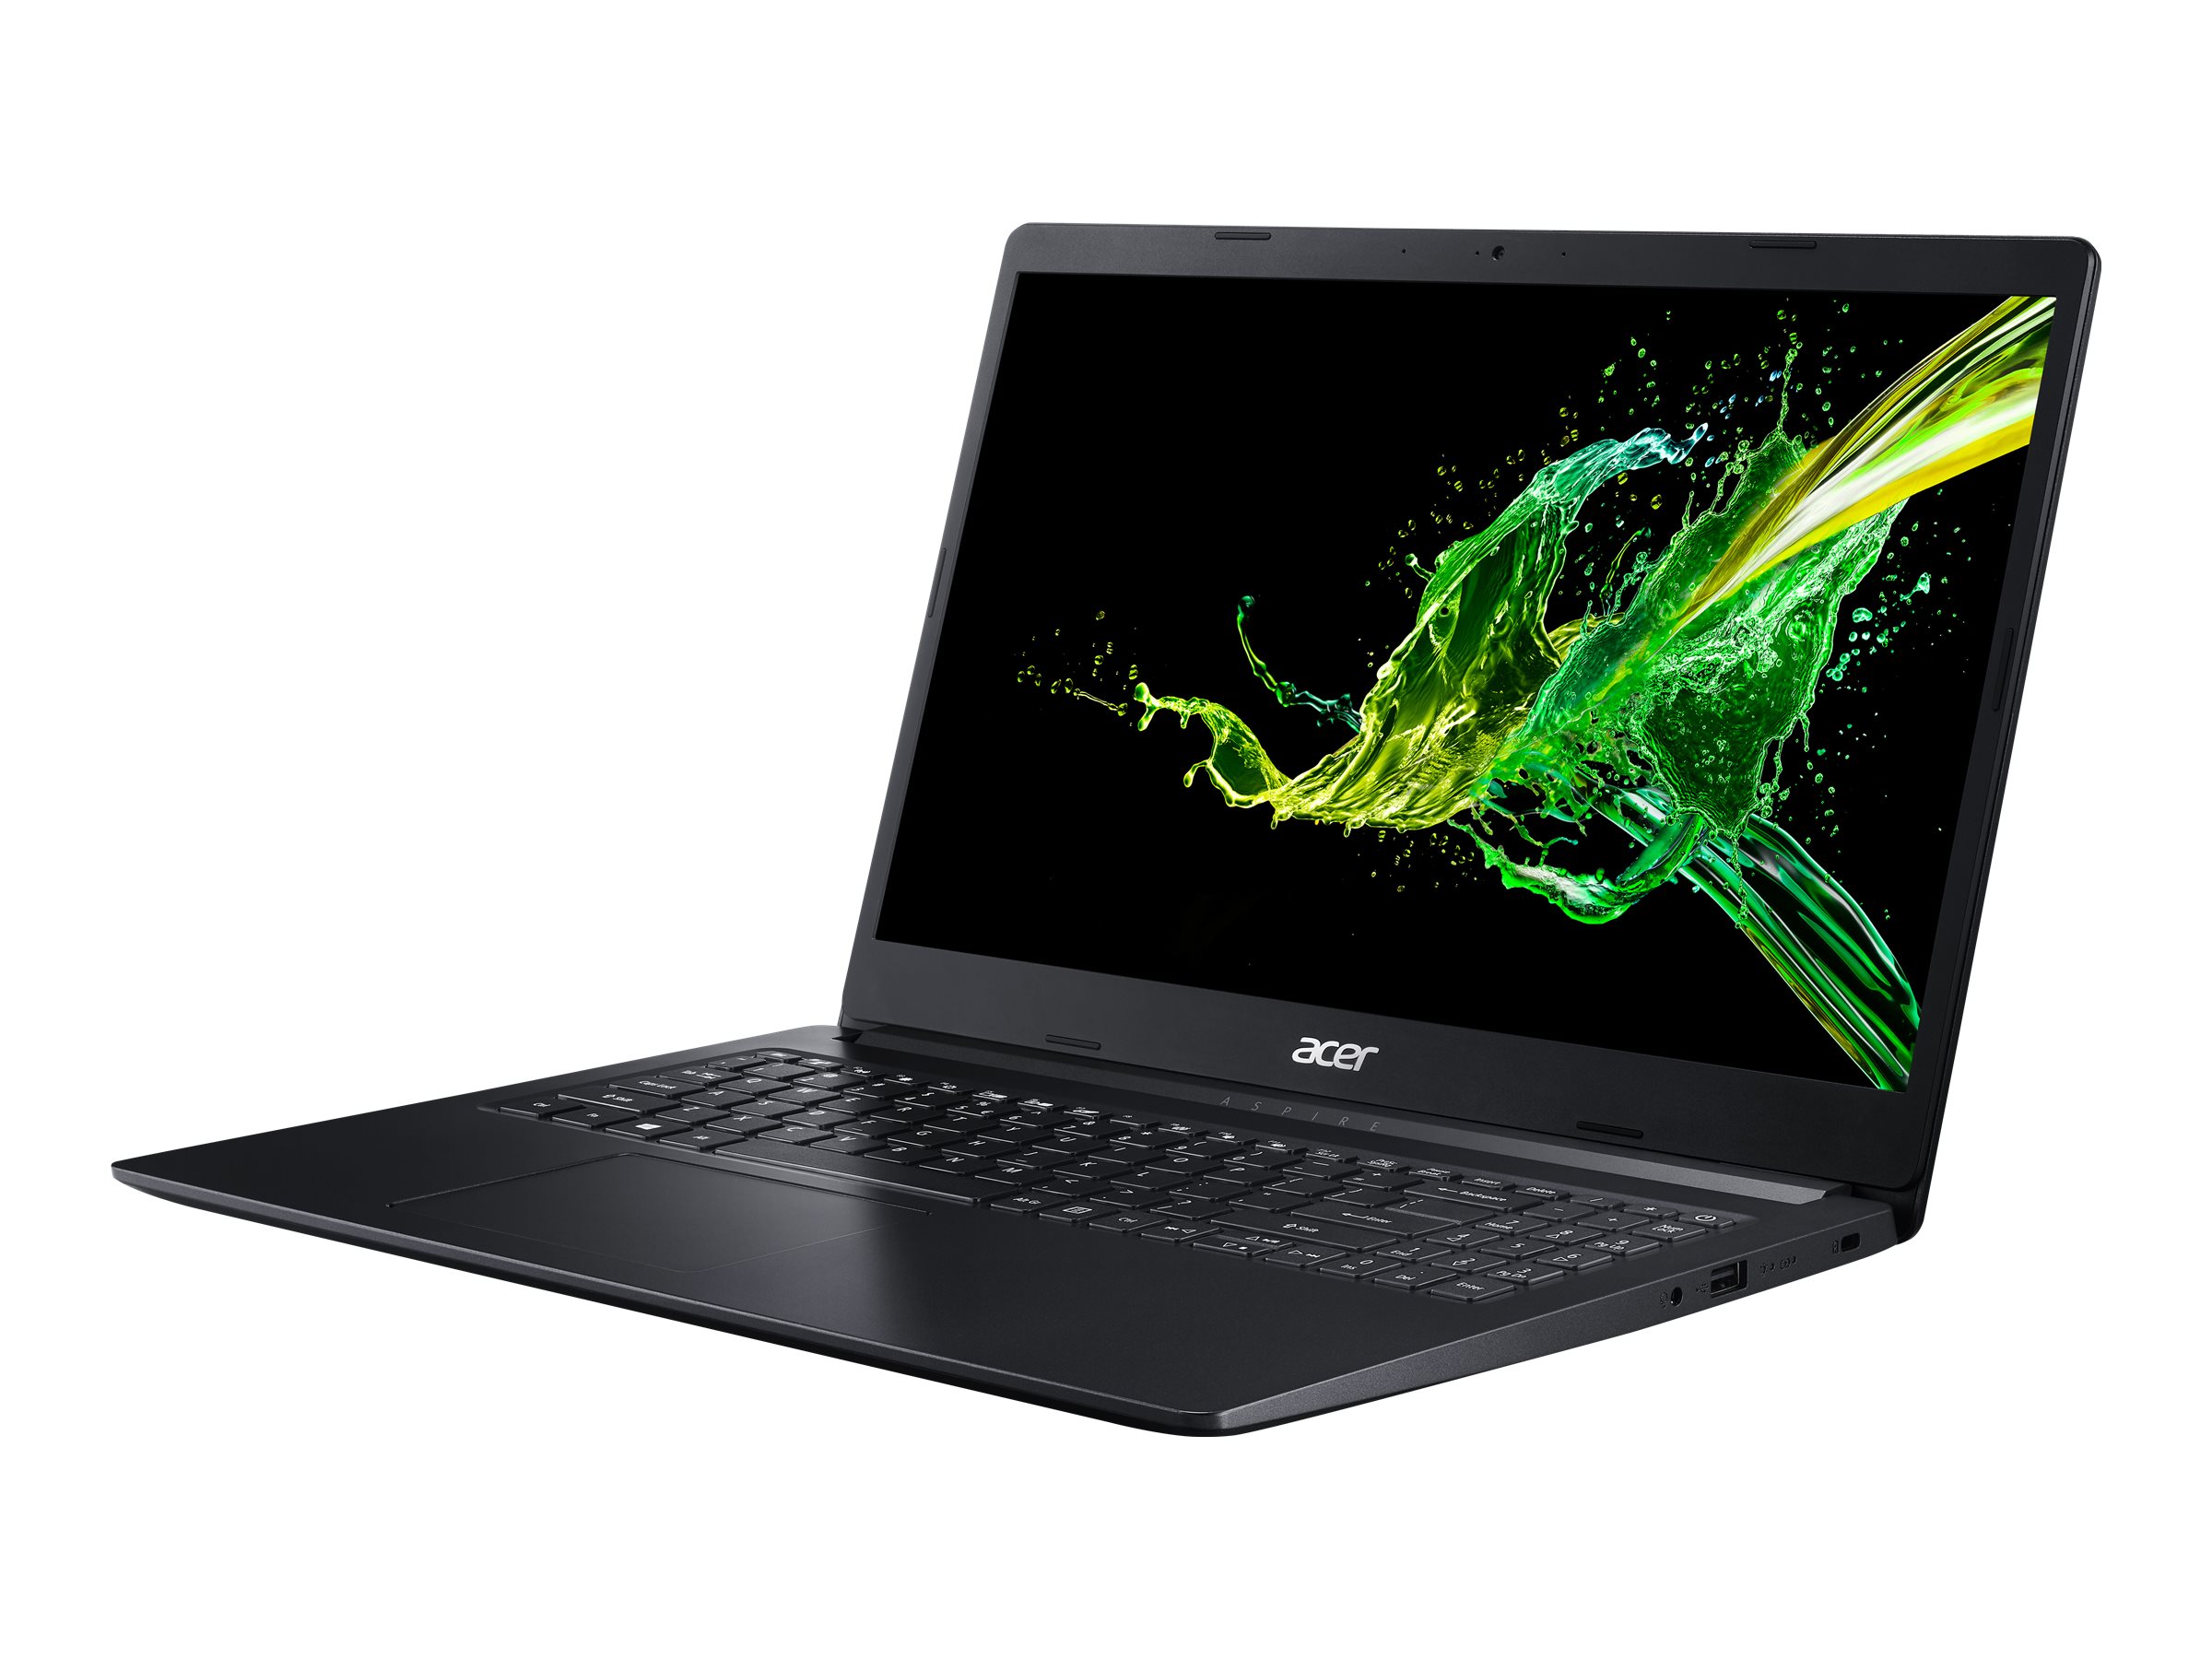 Acer Aspire 1 A115-31-C2Y3 15.6" FHD Laptop, Intel Celeron, 4GB RAM, 64GB SSD, Windows 10 Home in S mode, Charcoal Black, NX.HE4AA.003 - image 5 of 8